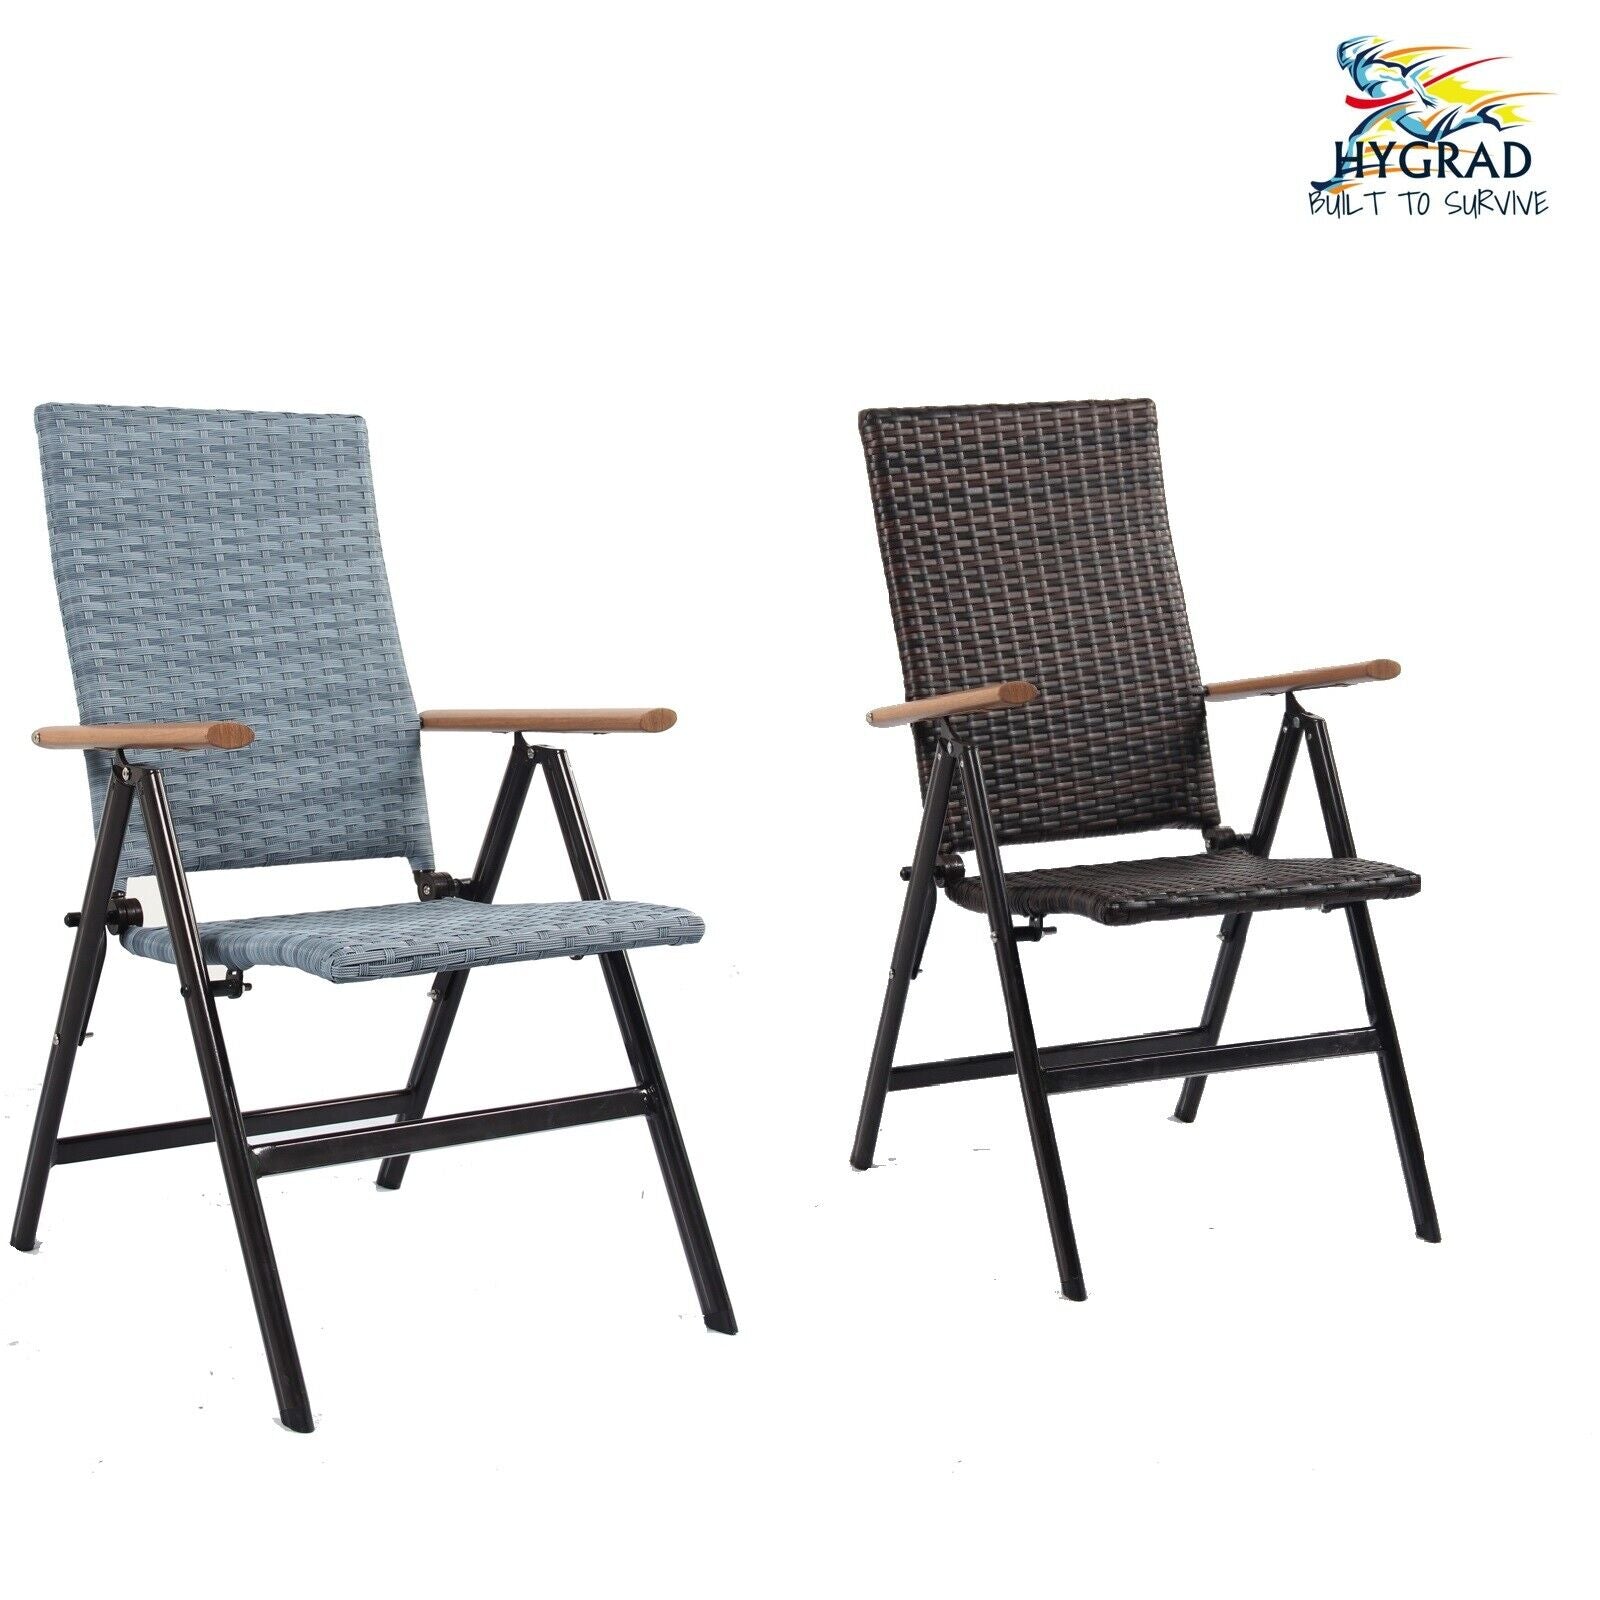 Pair of Outdoor Folding Rattan Chairs 7 Position Rattan Garden Chairs Grey/Brown